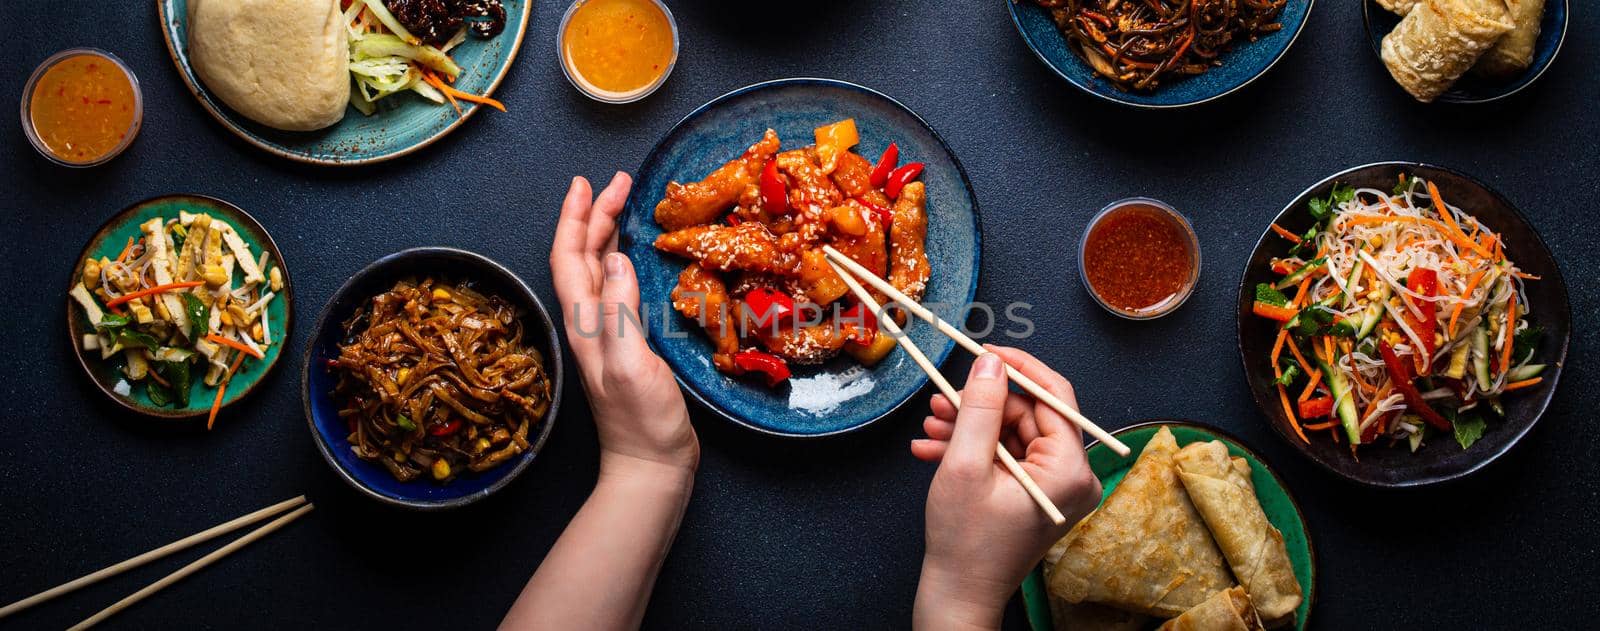 Set of Chinese dishes on table, female hands holding chopsticks: sweet and sour chicken, fried spring rolls, noodles, rice, steamed buns with bbq glazed pork, Asian style banquet or buffet, top view .